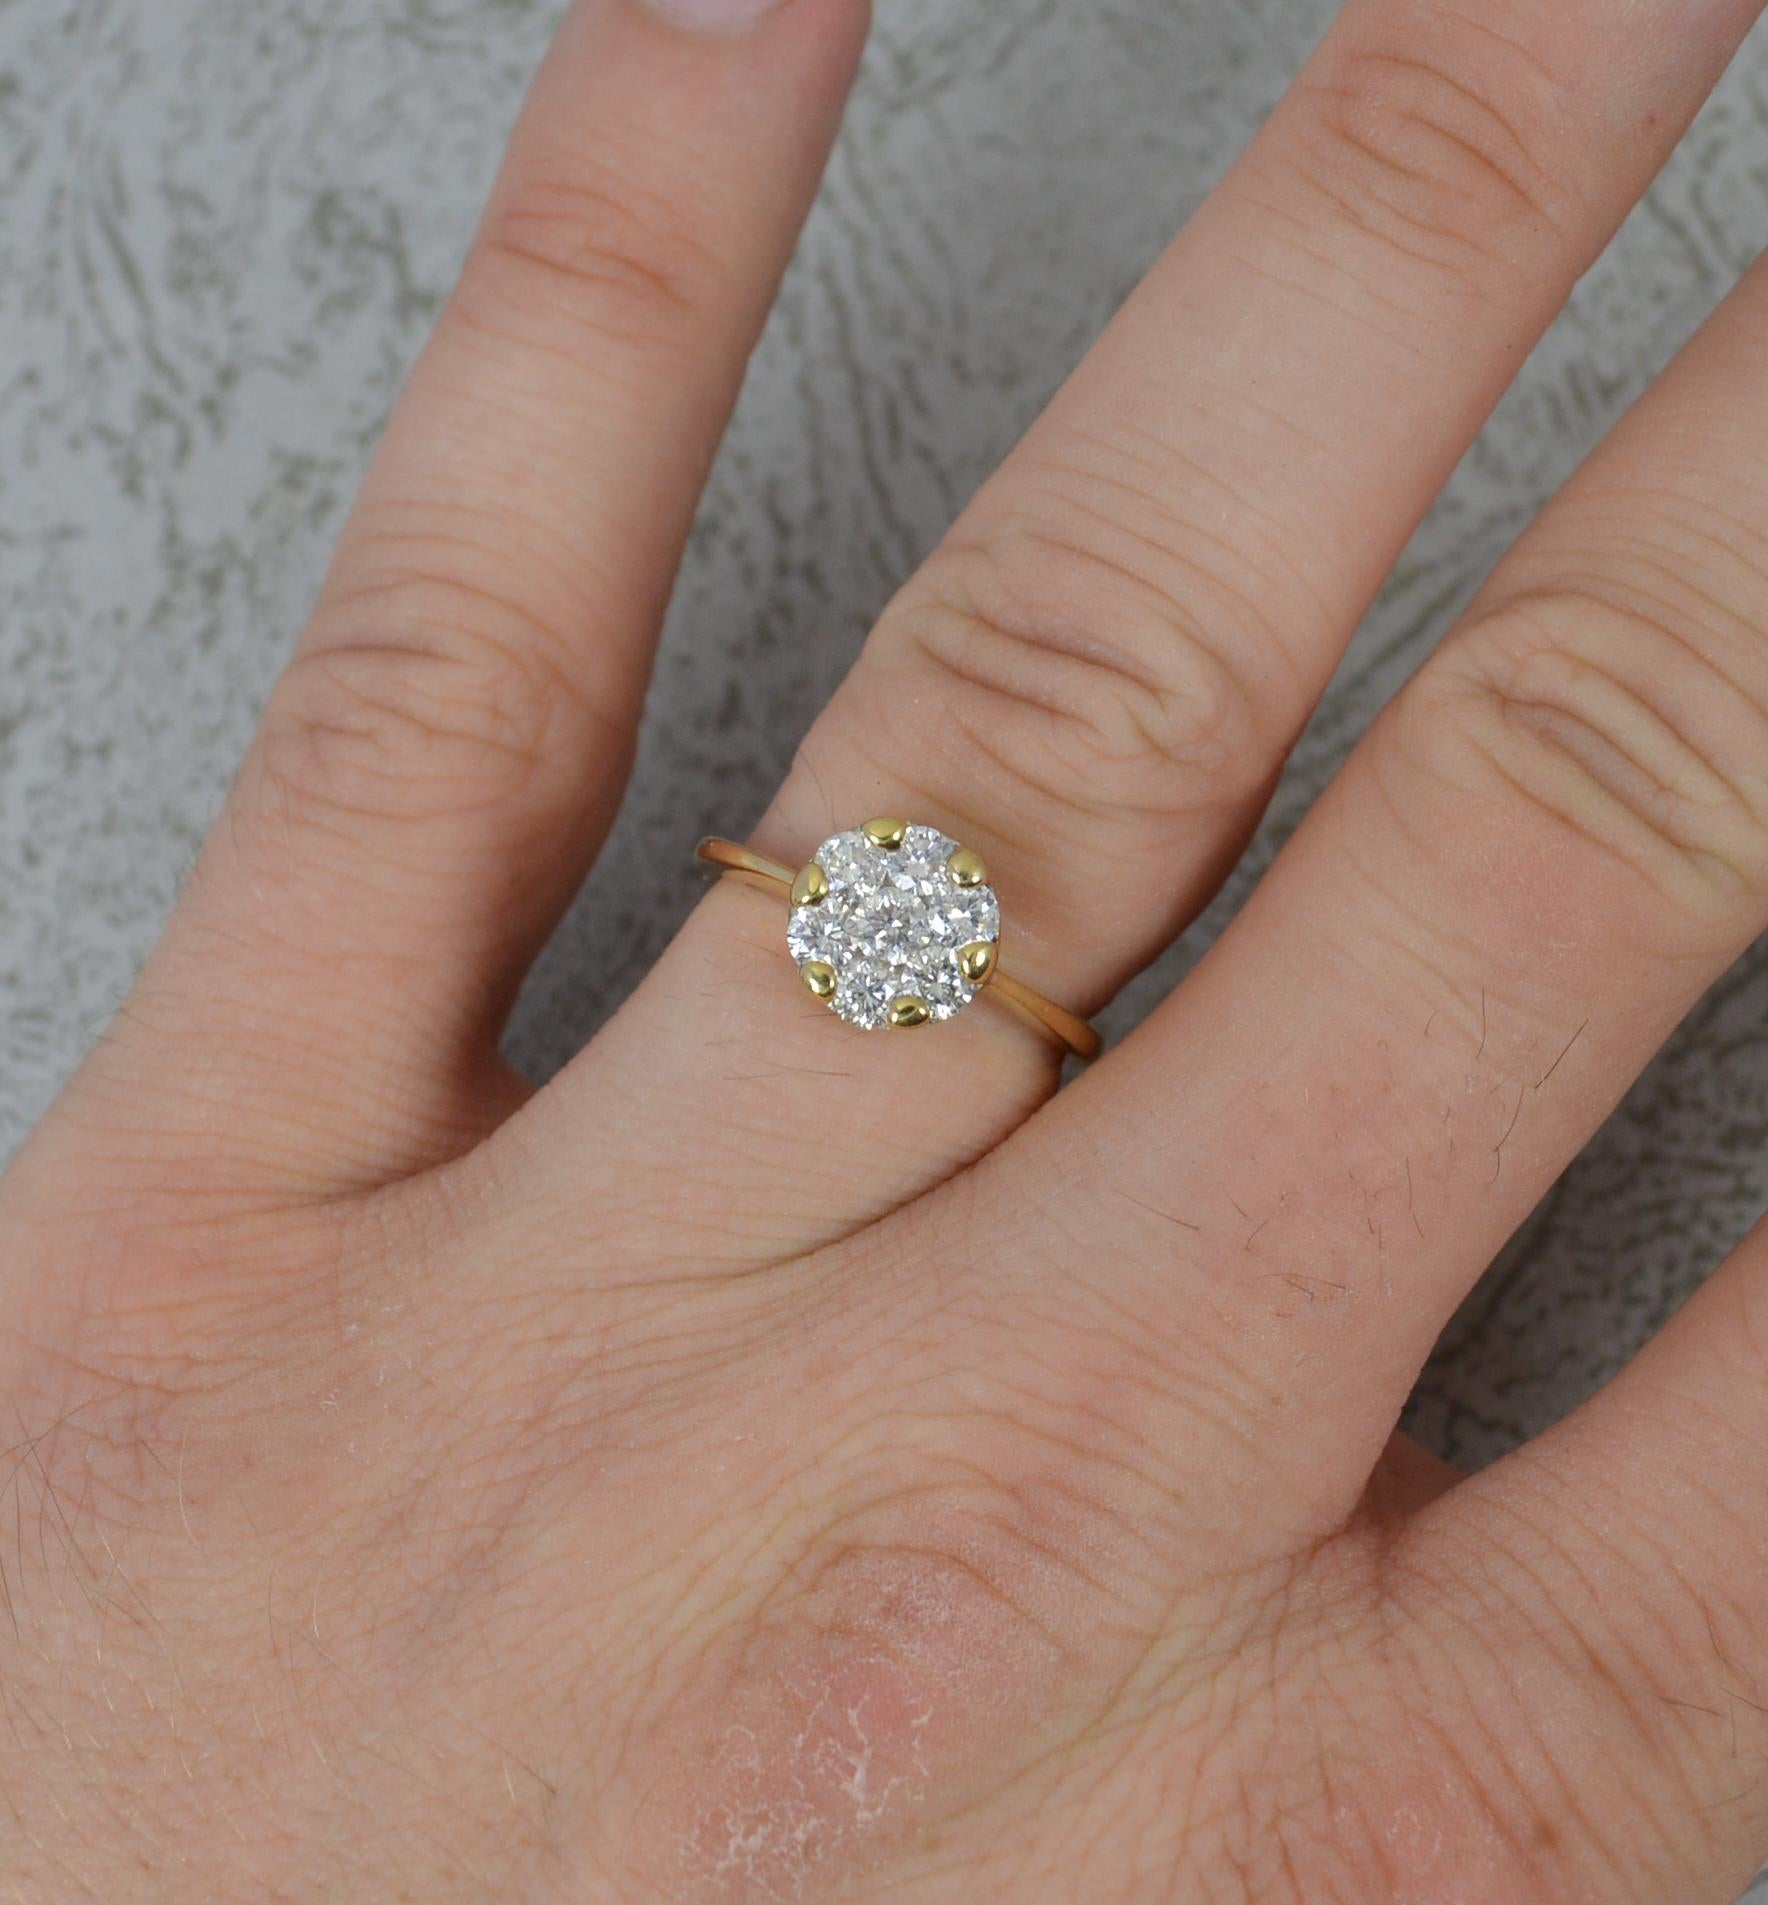 A superb contemporary diamond cluster ring.
Solid 18 carat yellow gold example.
The circular cluster head, 8.8mm diameter, set with seven round brilliant cut diamonds to total 0.75cts. Vs clarity. Protruding 4.5mm off the finger.

CONDITION ;